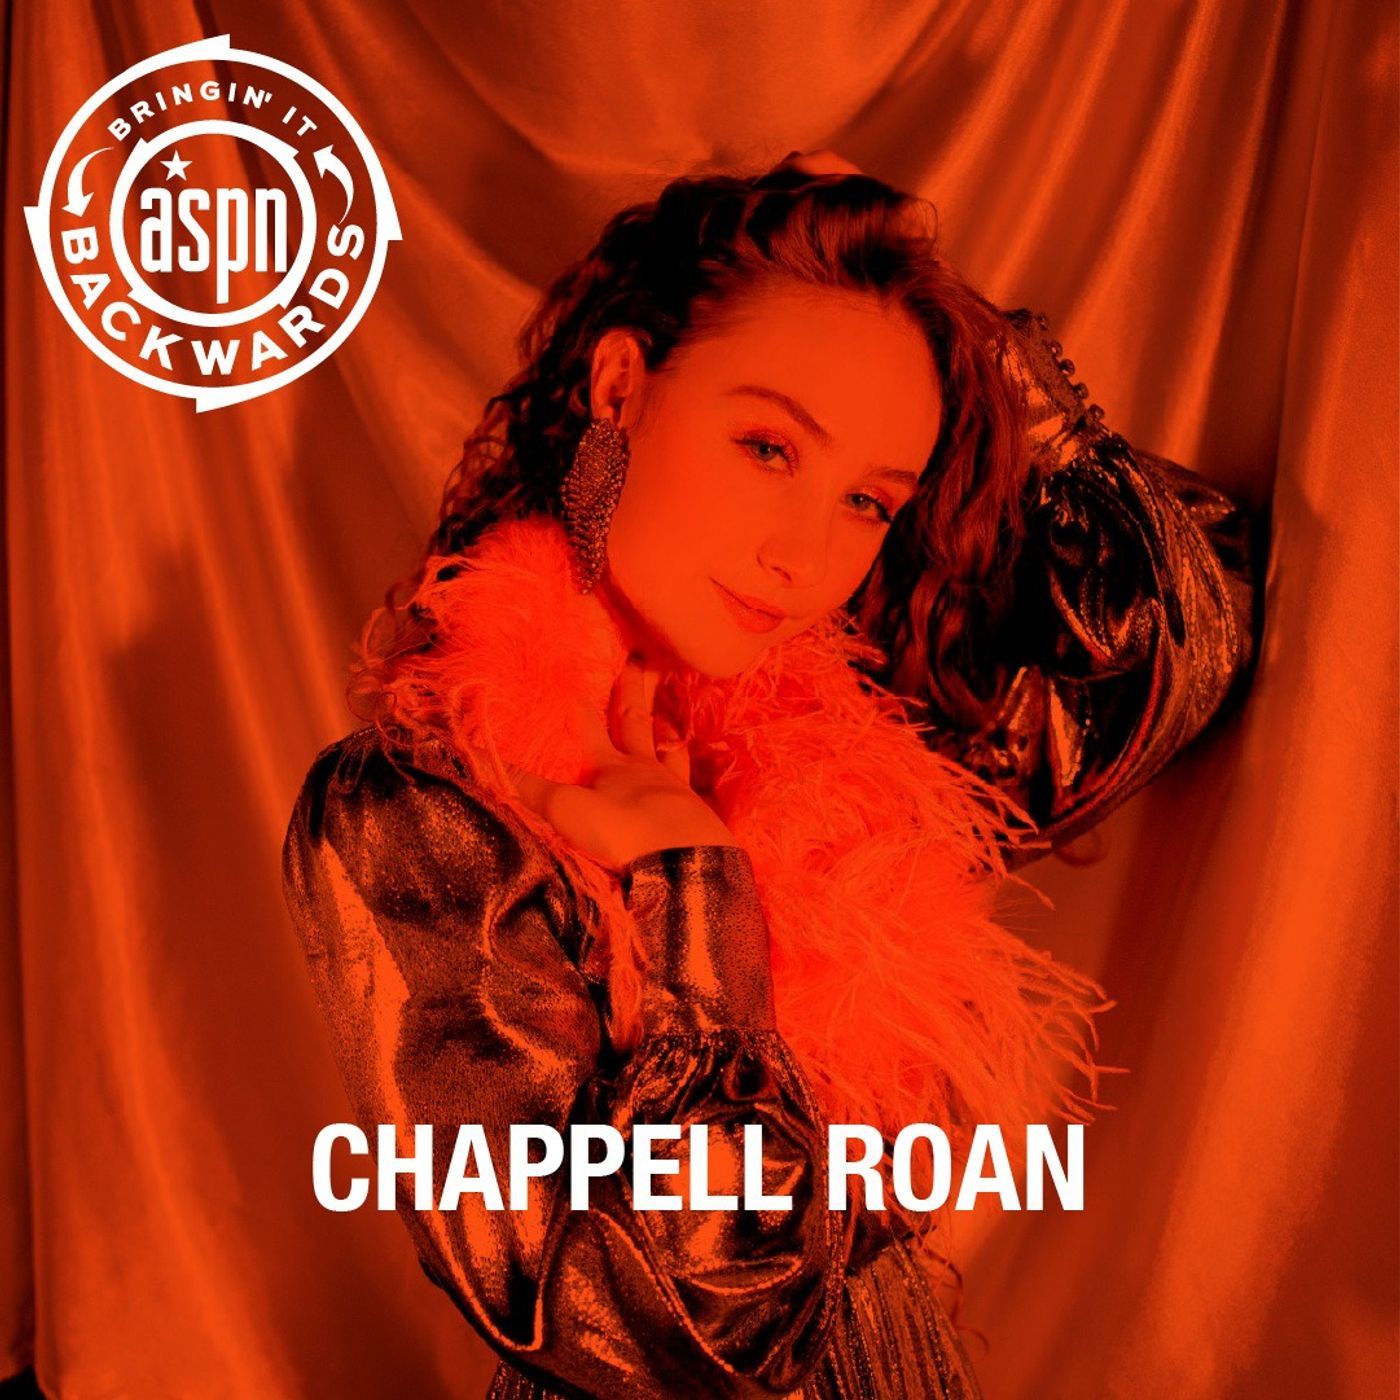 Interview with Chappell Roan Image